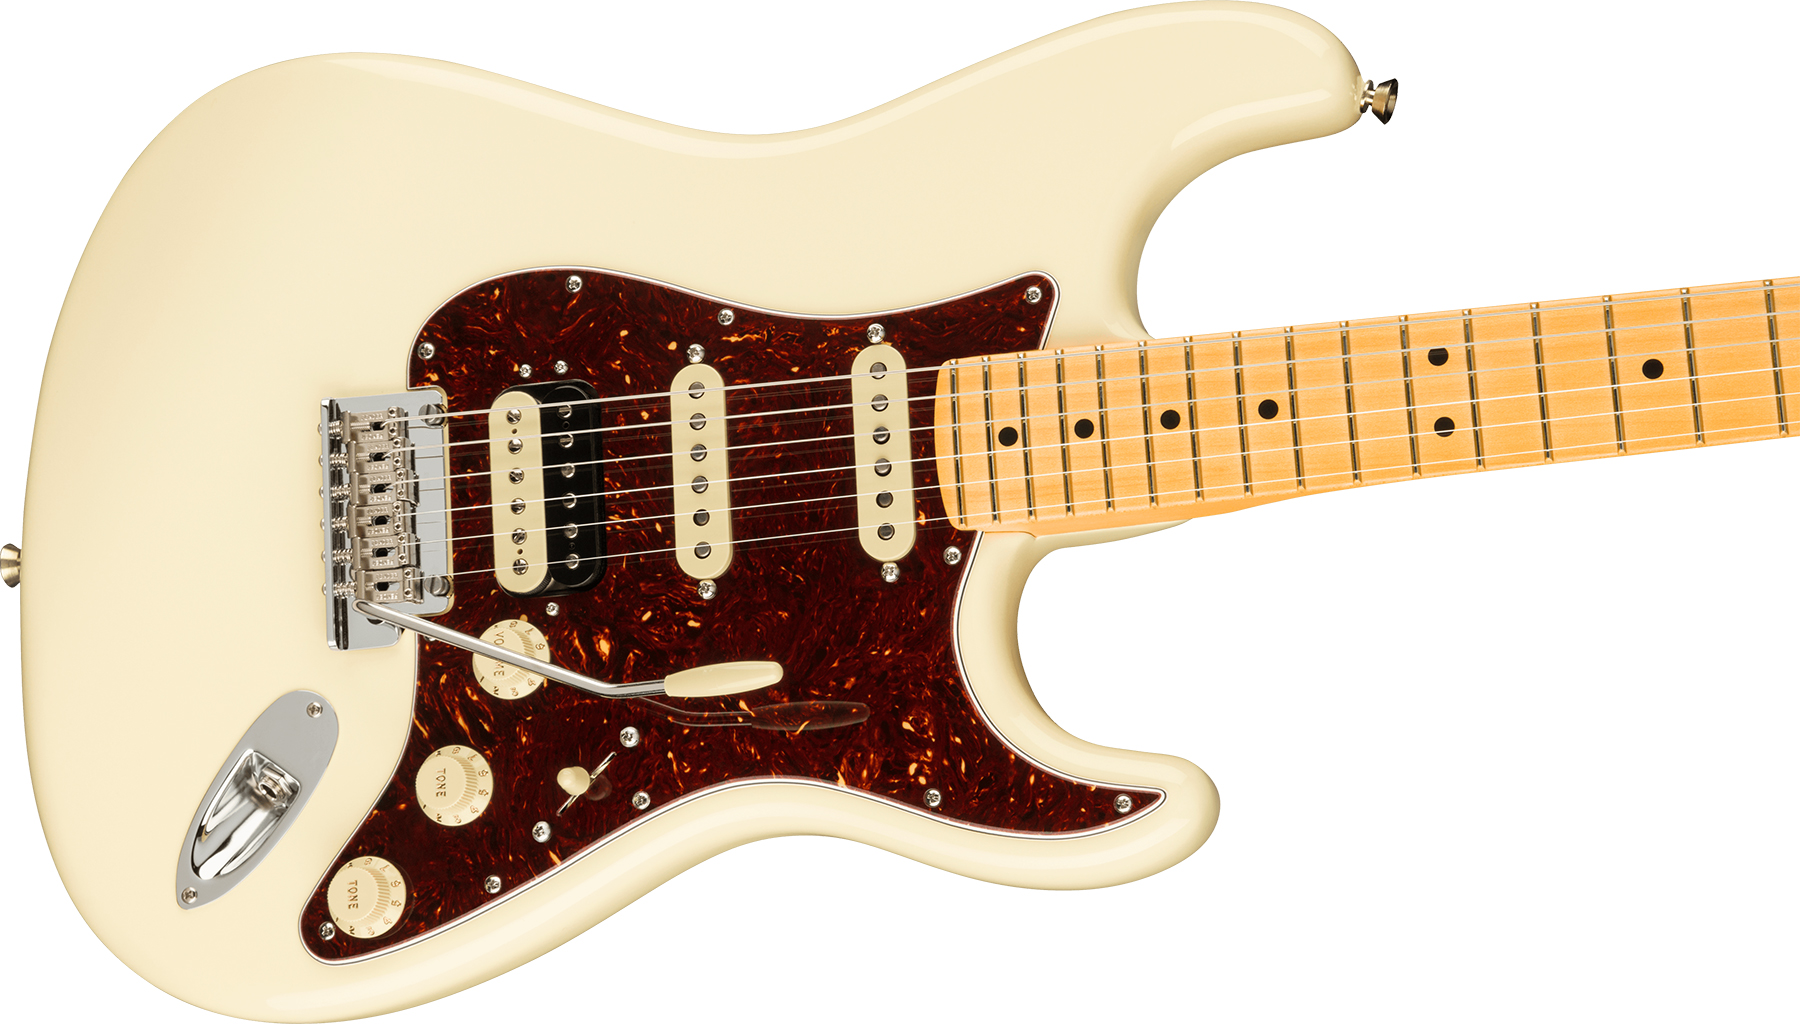 Fender Strat American Professional Ii Hss Usa Mn - Olympic White - Guitare Électrique Forme Str - Variation 2